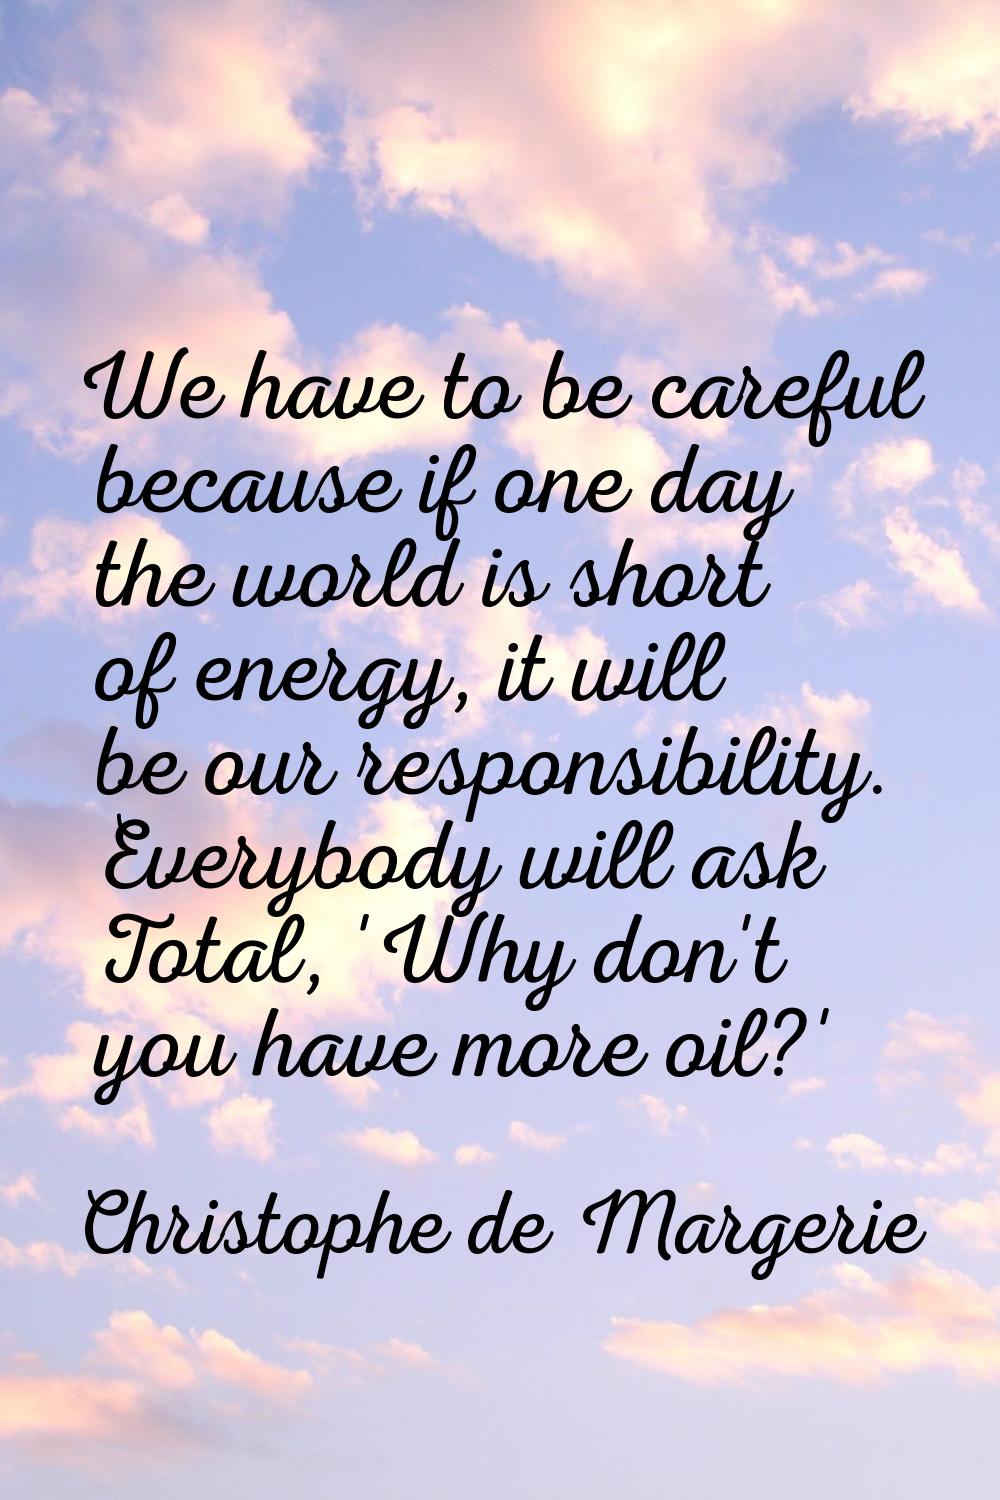 We have to be careful because if one day the world is short of energy, it will be our responsibilit